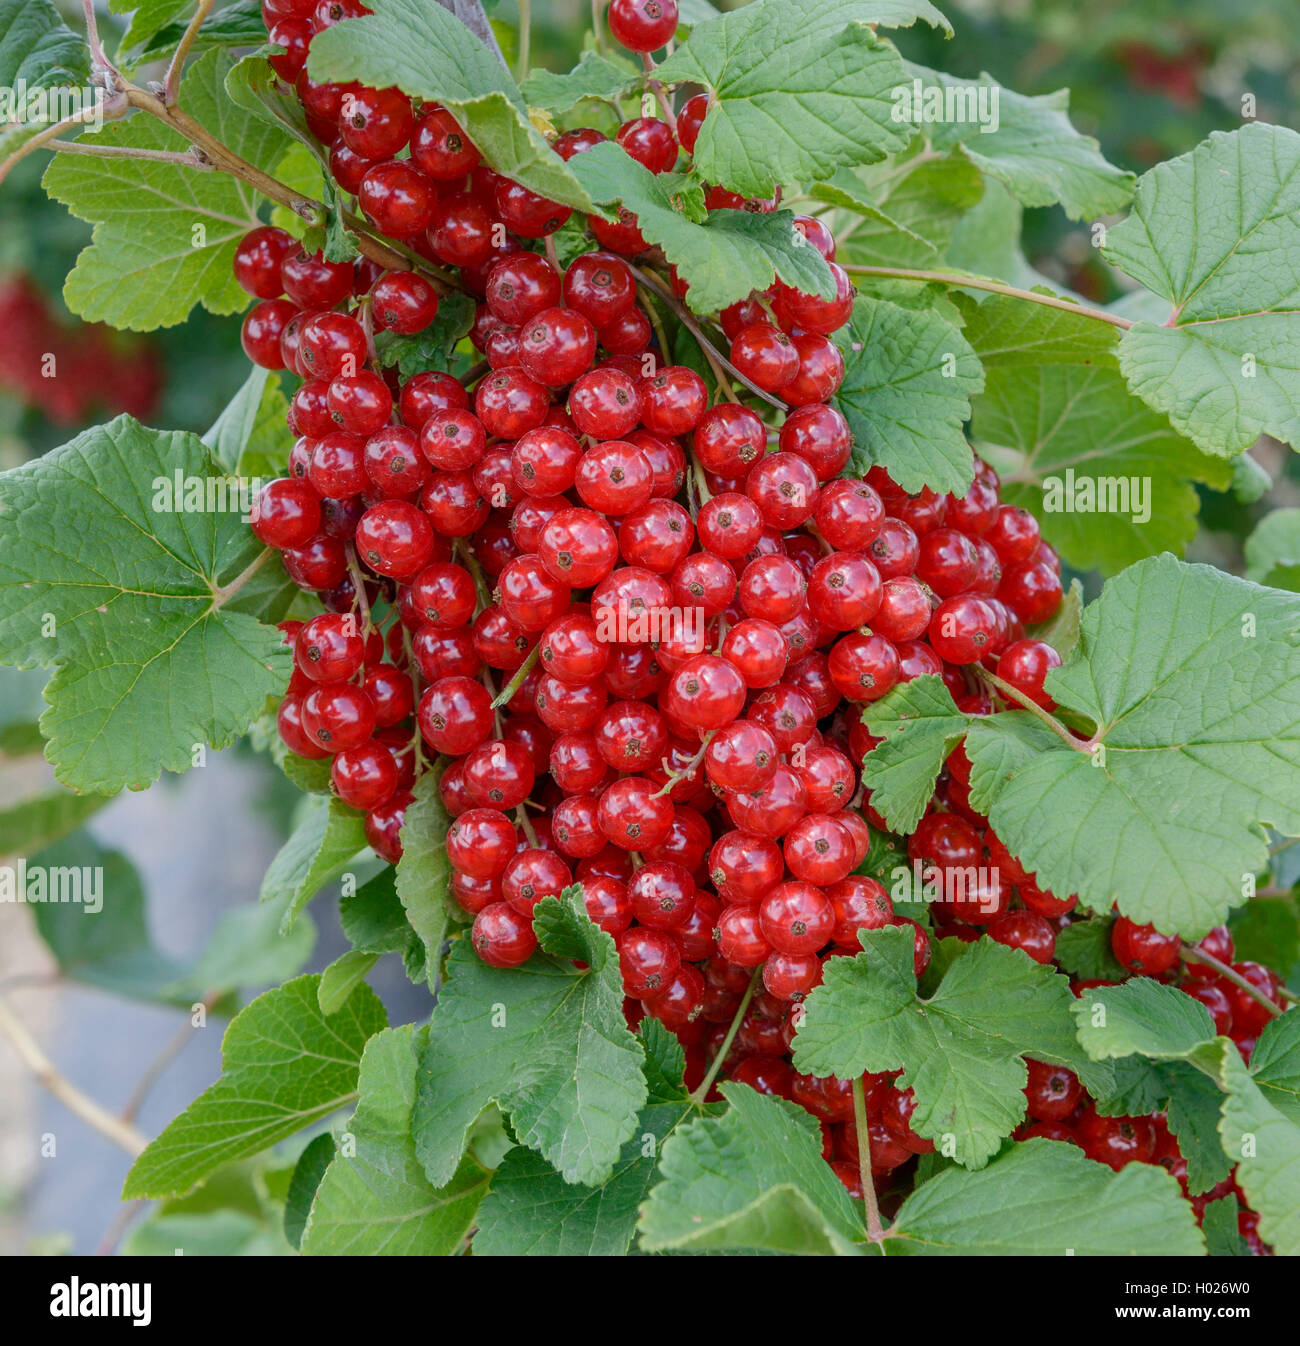 northern red currant (Ribes rubrum 'Rotet', Ribes rubrum Rotet), cultivar Rotet Stock Photo